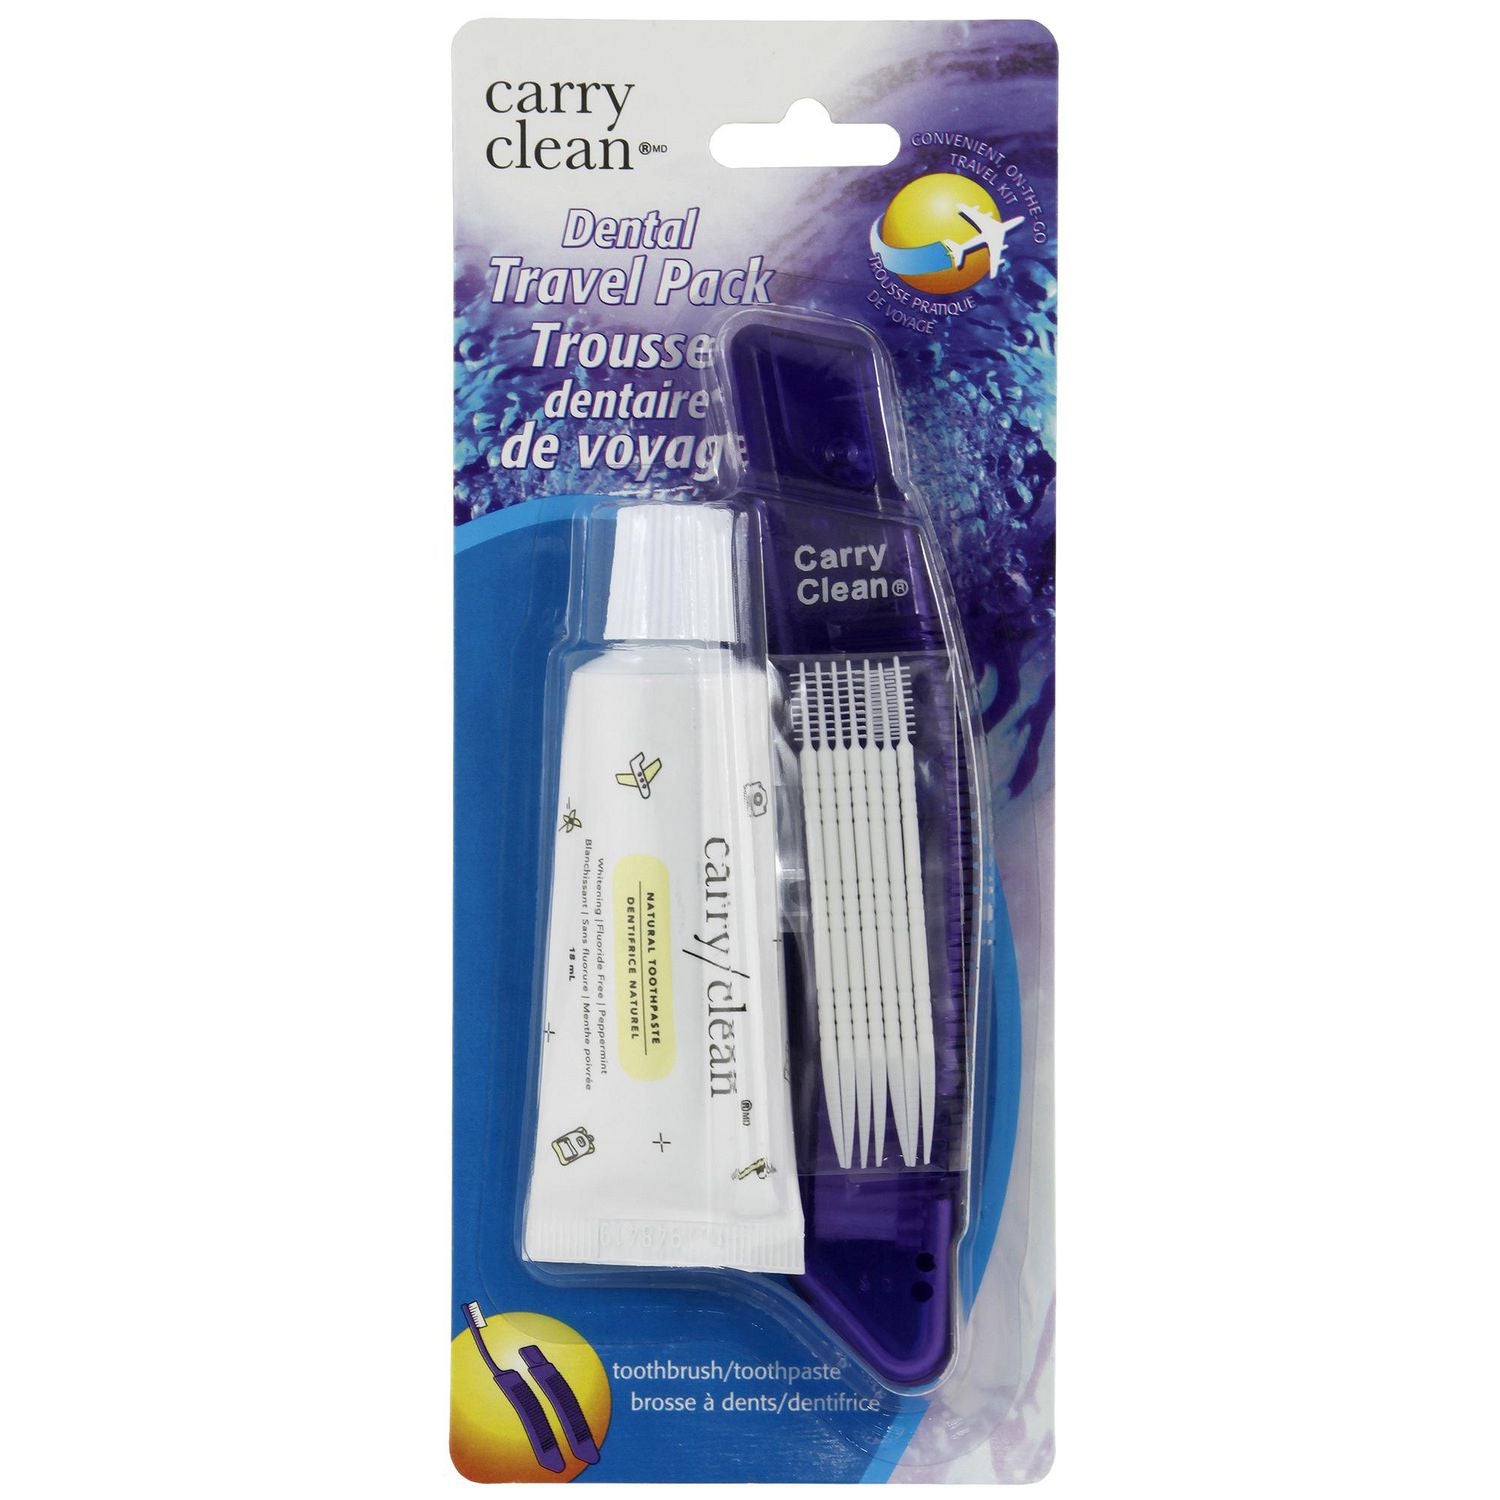 Clean Carry Dental Travel Pack